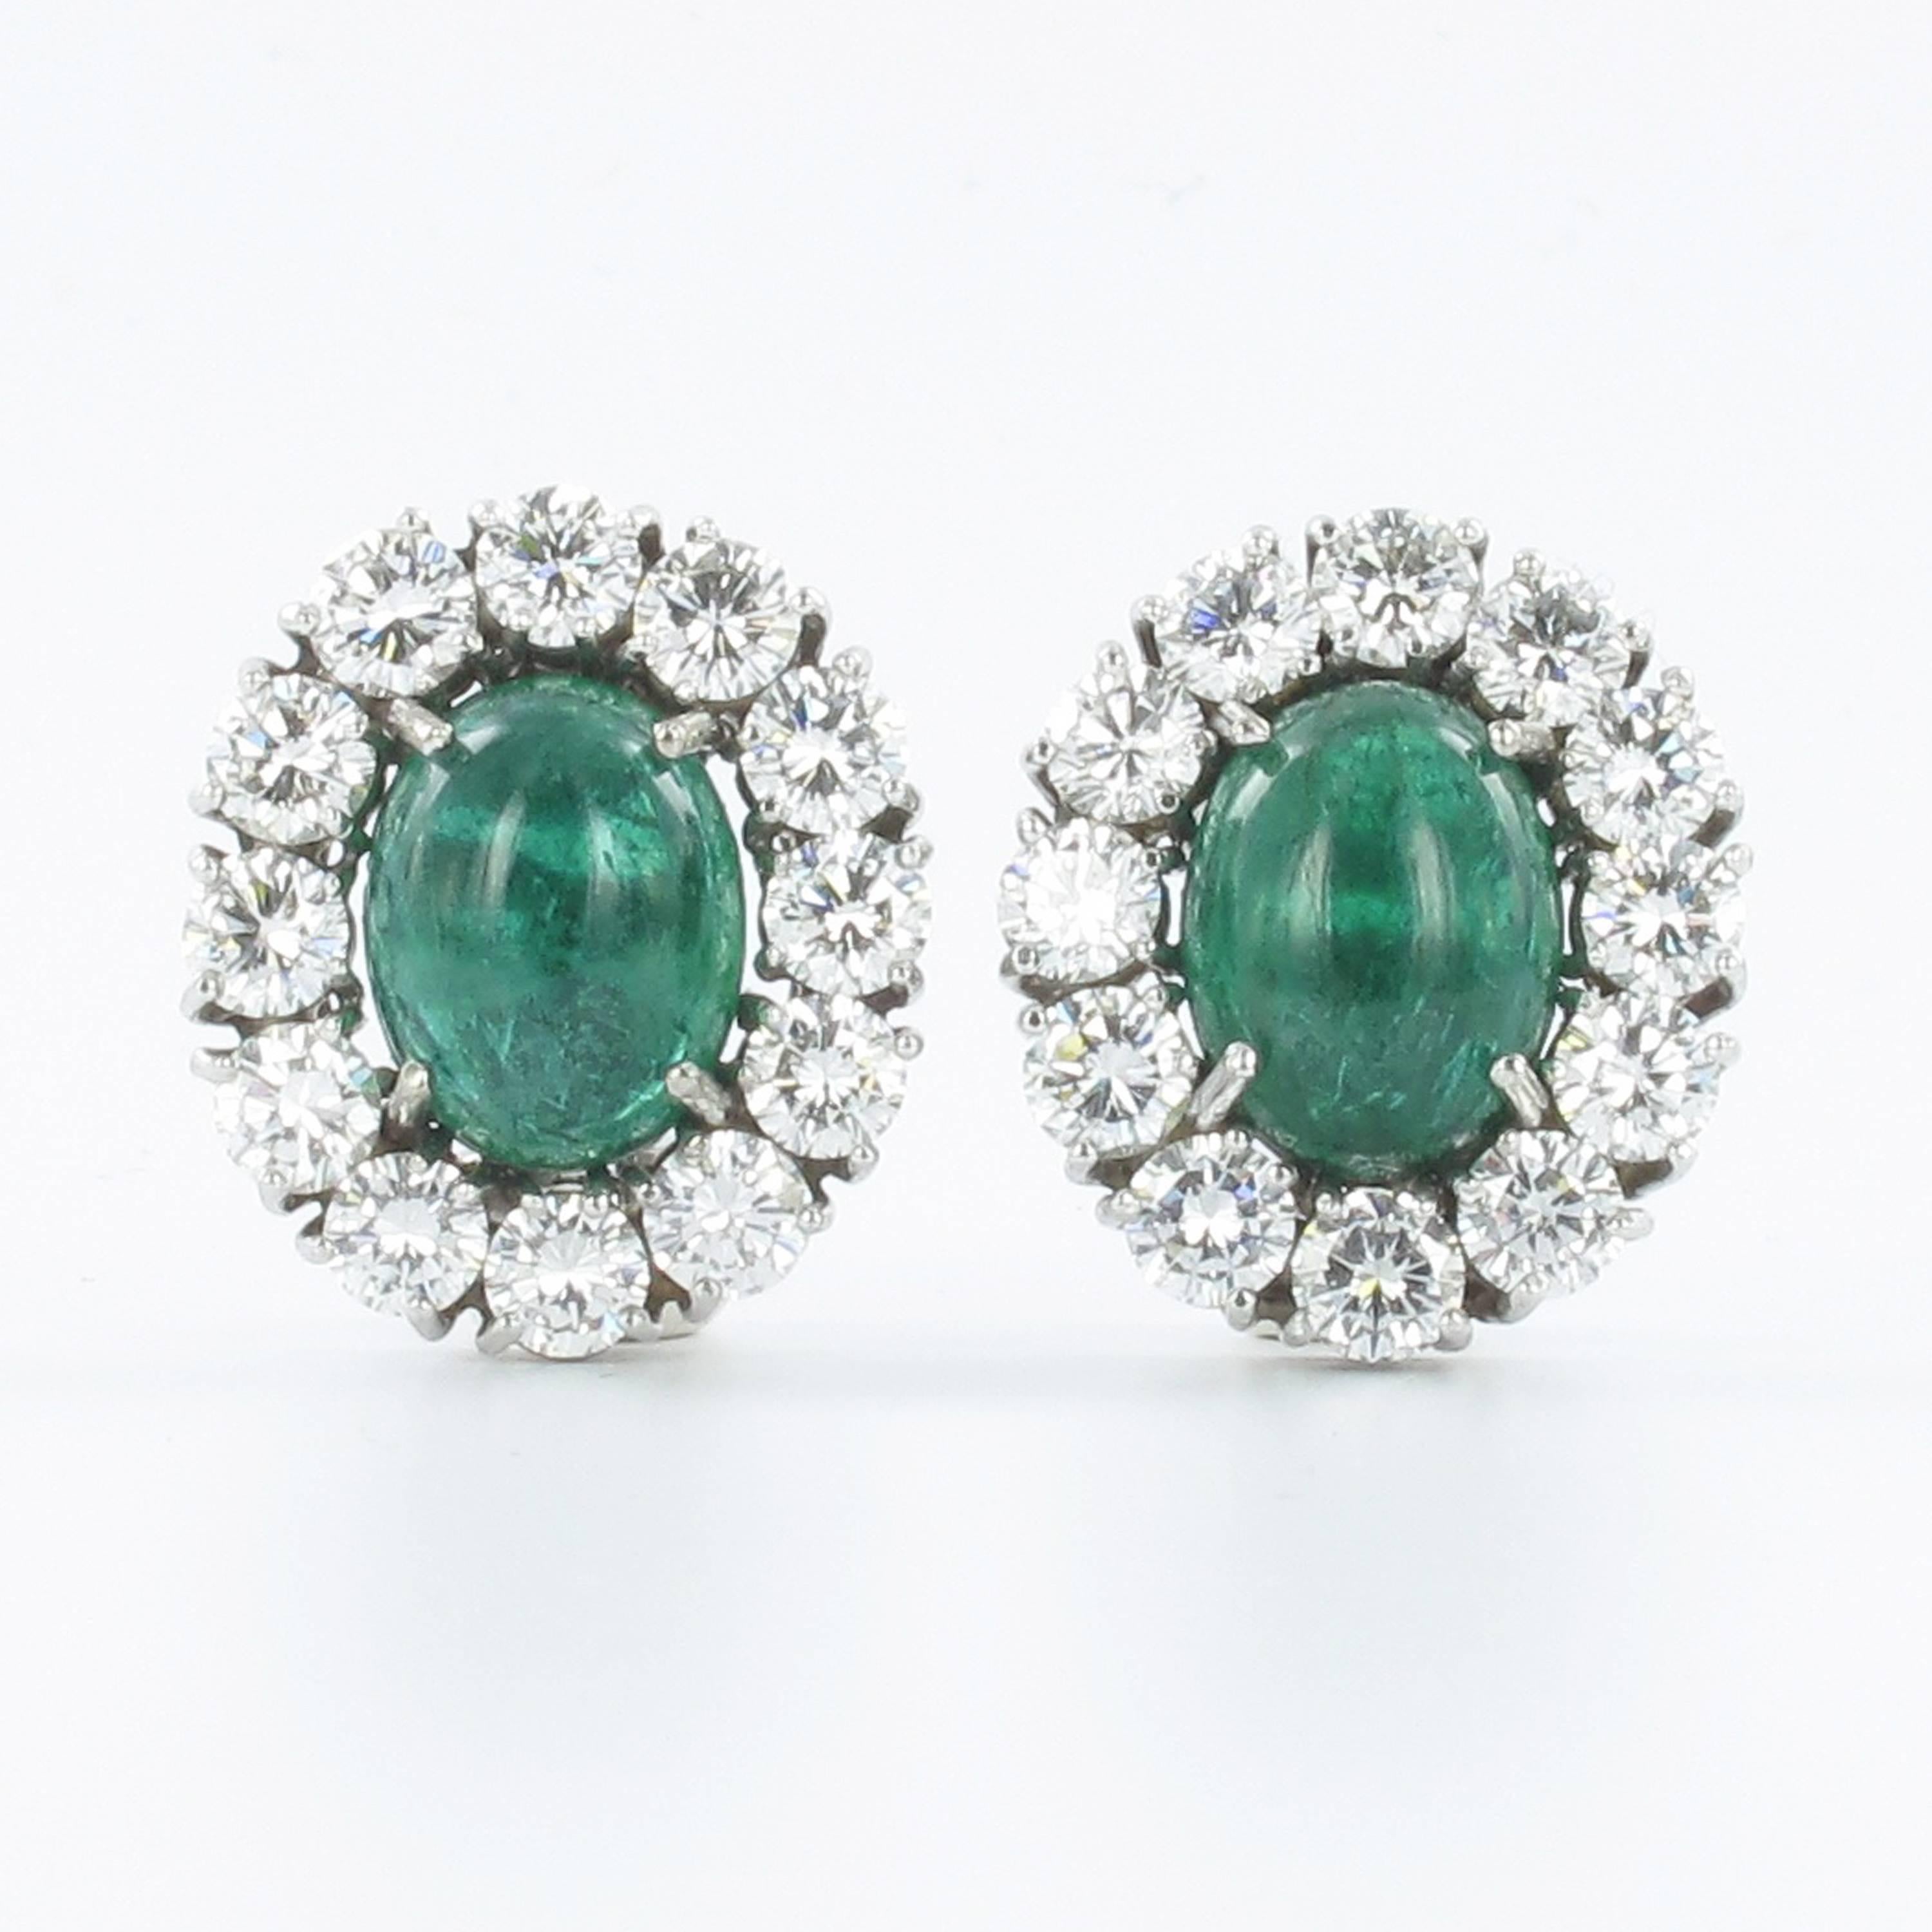 Classic ear clips in white gold 750. Two oval cabochon cut emeralds of approximate 12.5 x 9.5 mm in diameter totaling approximate 10.70 ct. Nice crystal and good color. The emeralds are of Brazilian origin. Entourage set with 24 brilliant cut